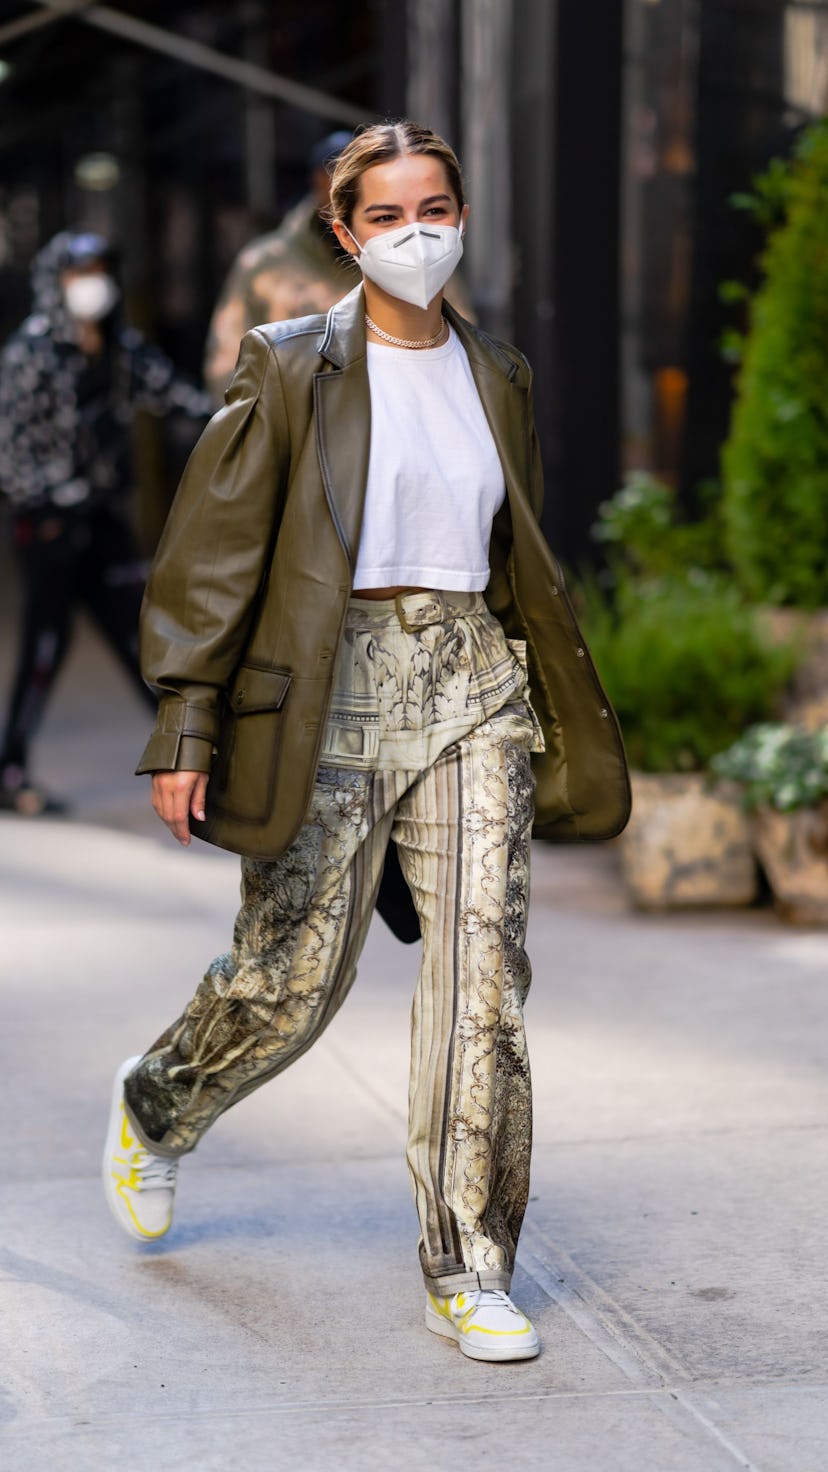 Addison Rae wears Baroque-print pants and a leather blazer on the street in one of her outfits to da...